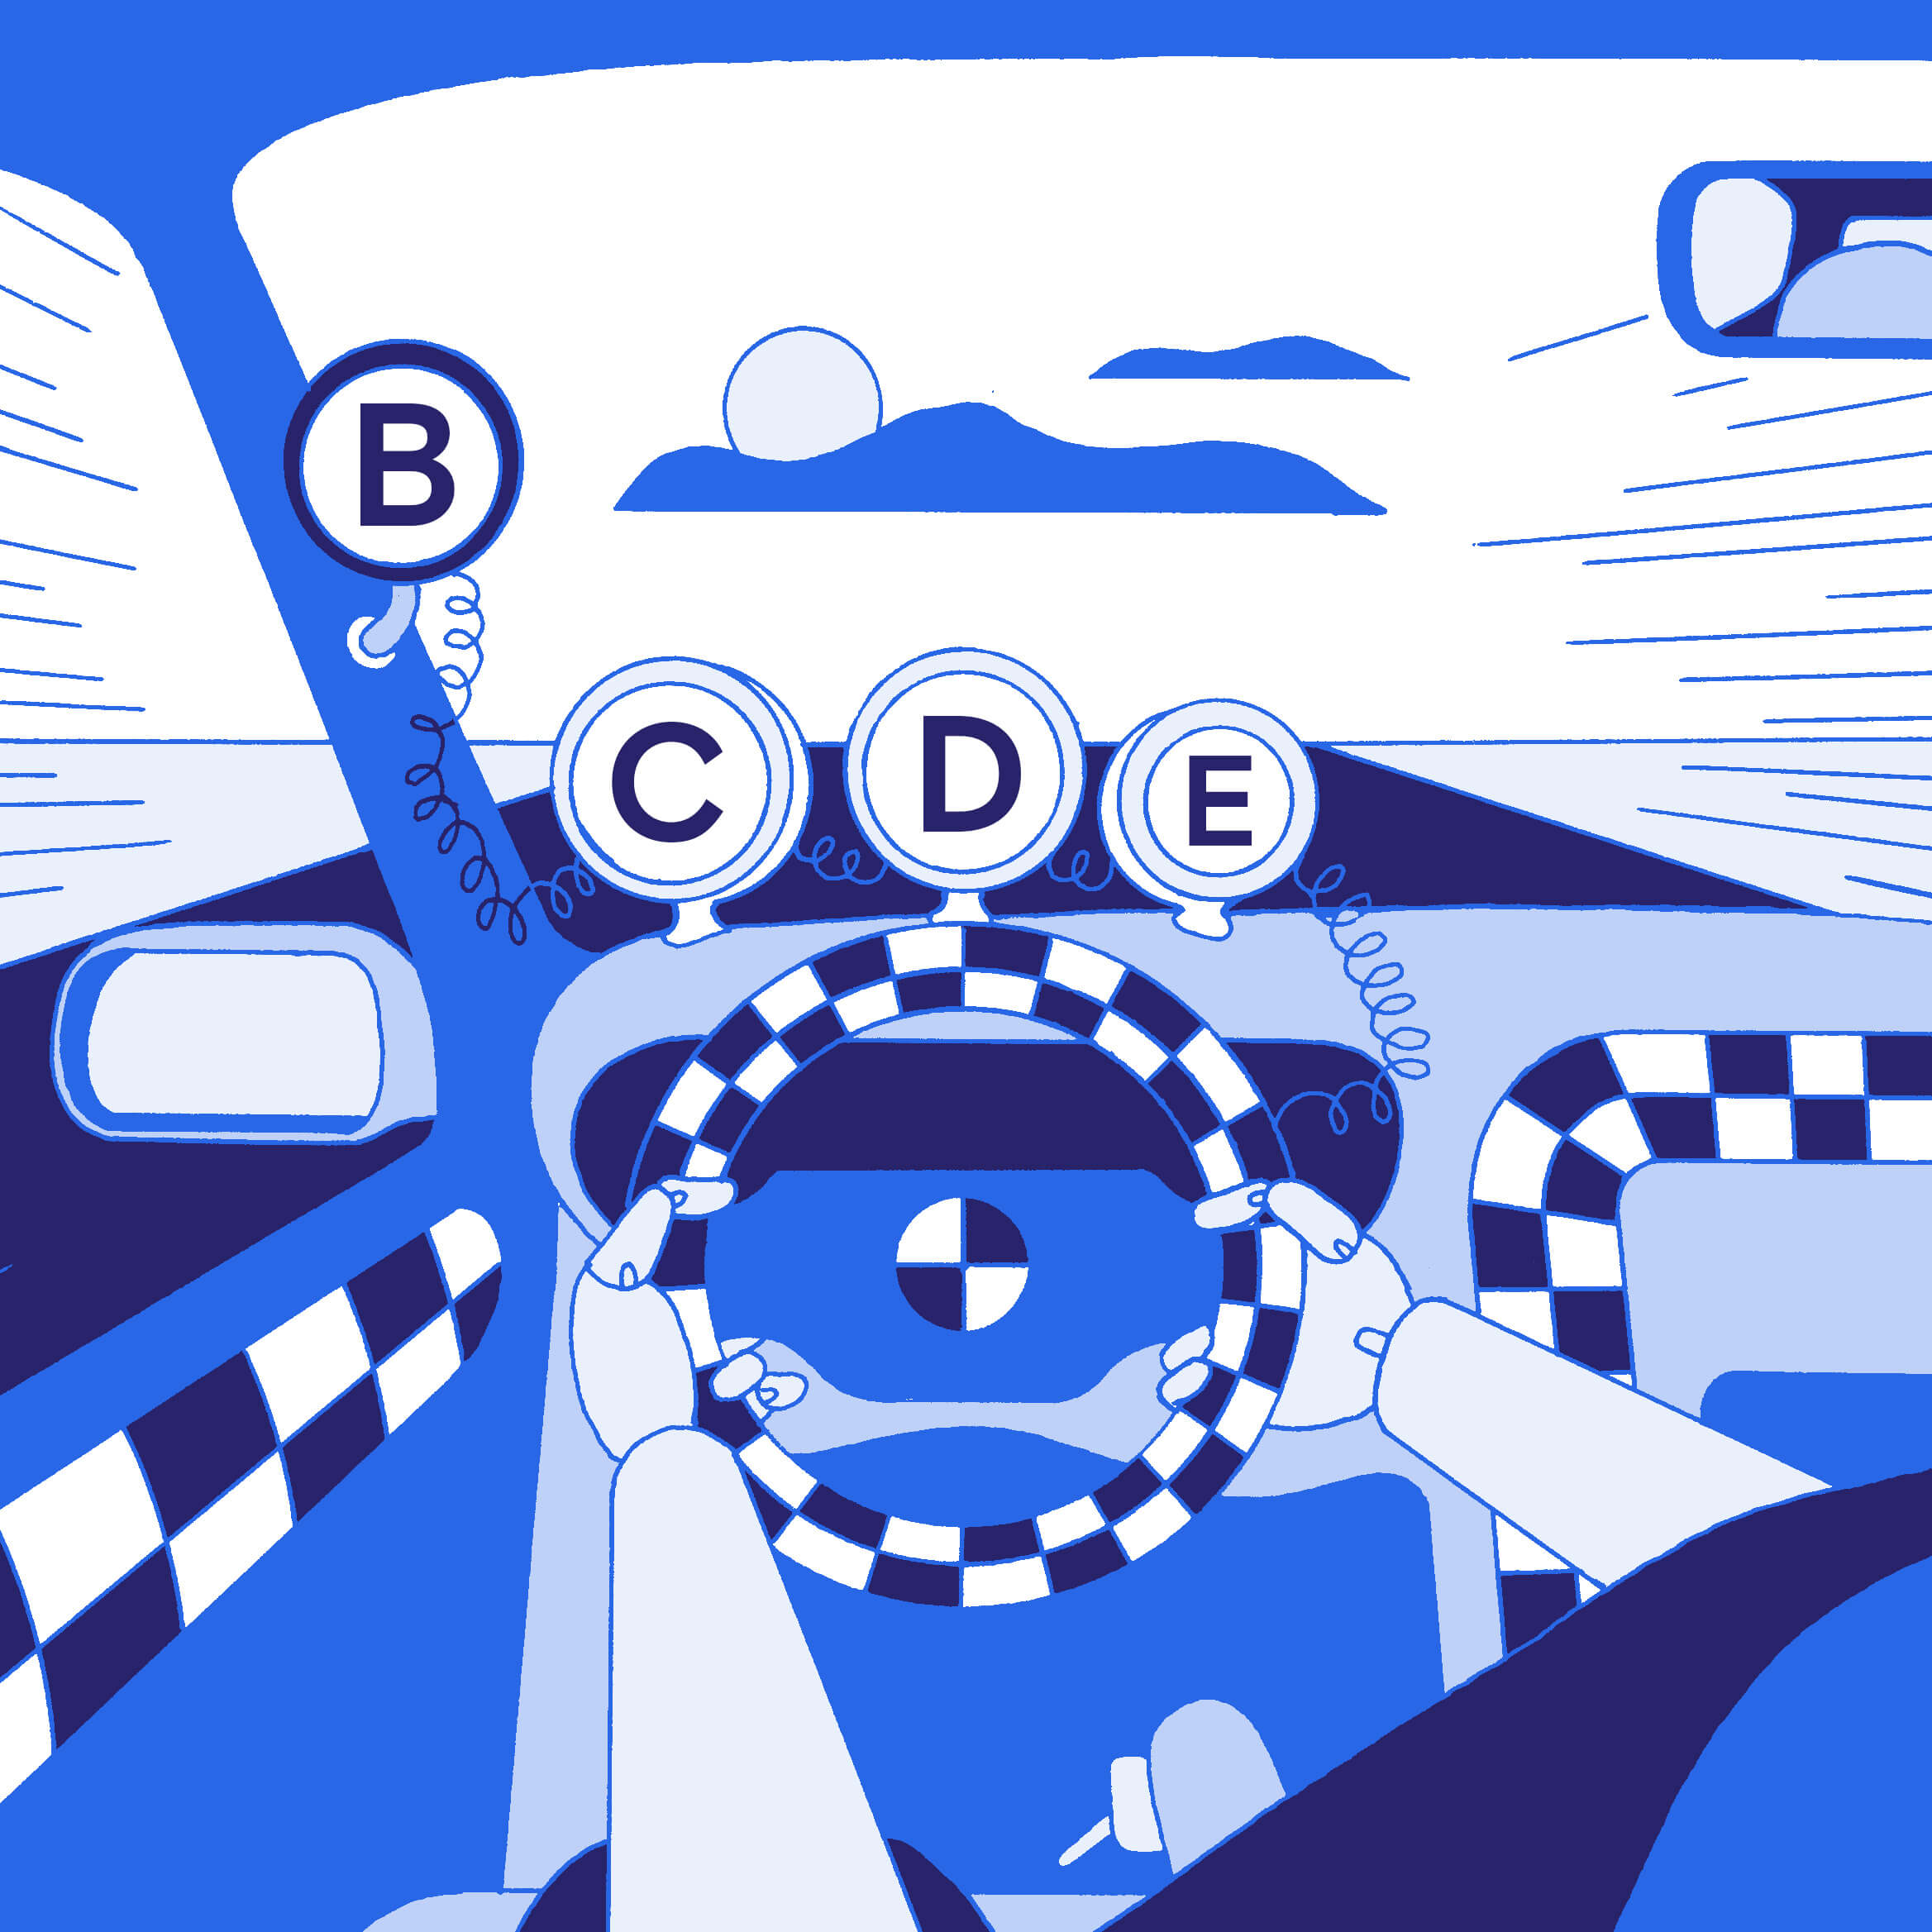 illustration of the point of view of a driver within a car with various typographical elements in place of dials, and a sunset in the distance